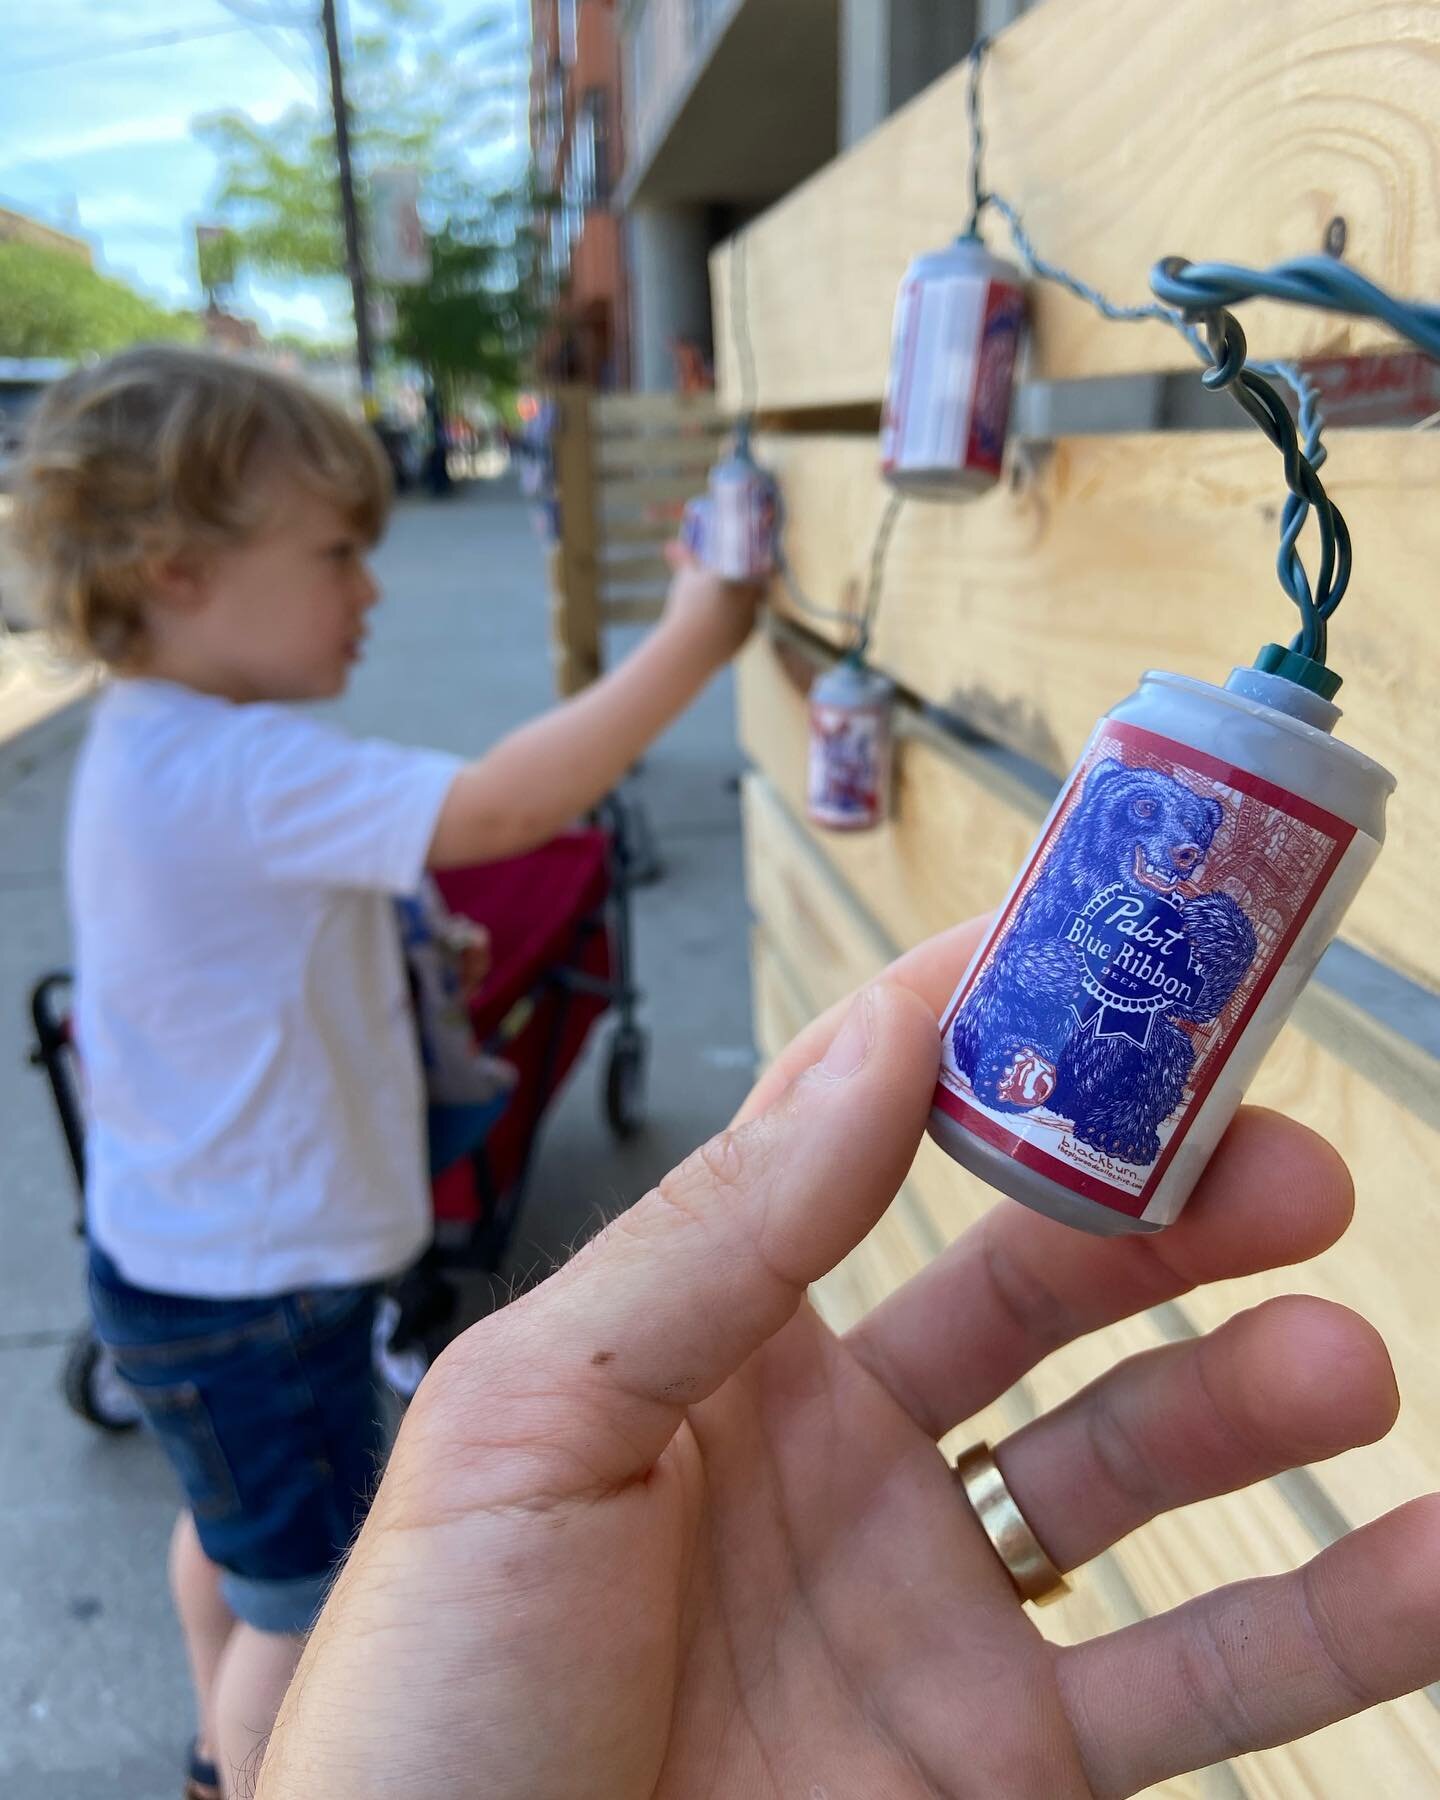 Apparently my PBR can is now a patio lantern. Spotted this yesterday while making the rounds #bearsinthestreets 
.
.
.
.
.
.
.
.
.
.
.
.
.
#jeffblackburn #pbr #pabstblueribbon #ink #inkwork #linework #bears #beer  #brushwork #design #draw #drawing #i